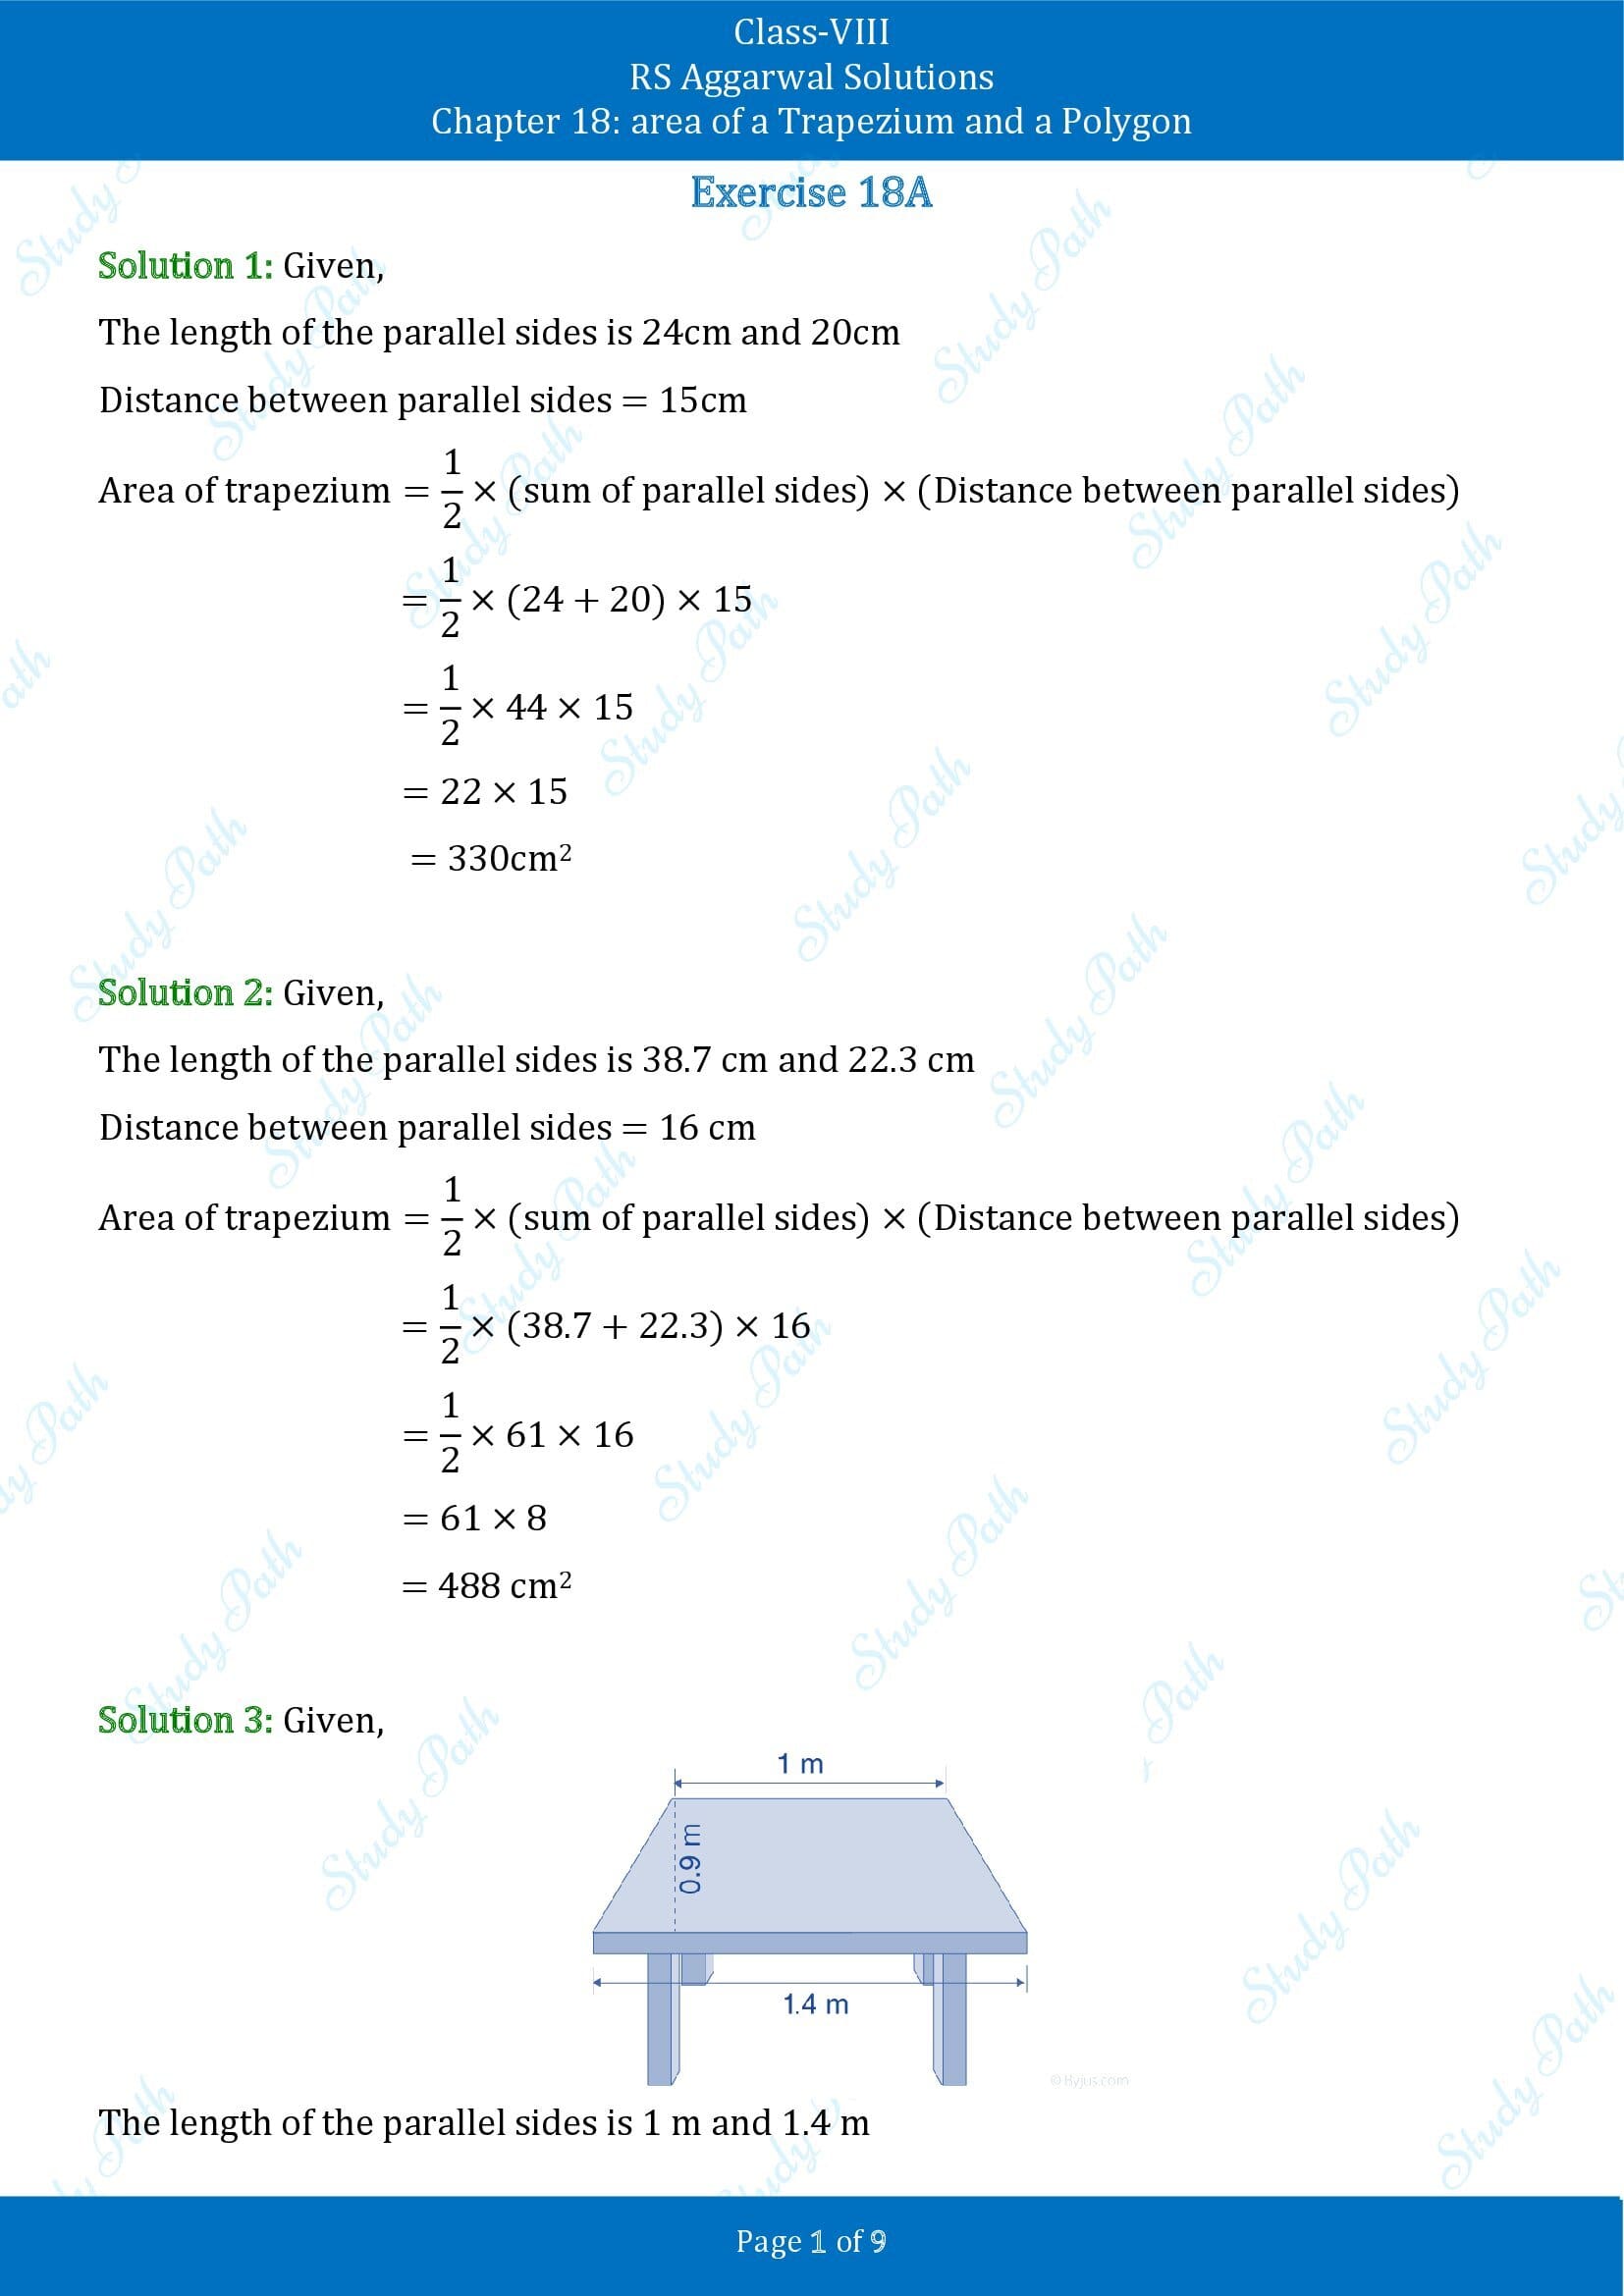 RS Aggarwal Solutions Class 8 Chapter 18 Area of a Trapezium and a Polygon Exercise 18A 00001